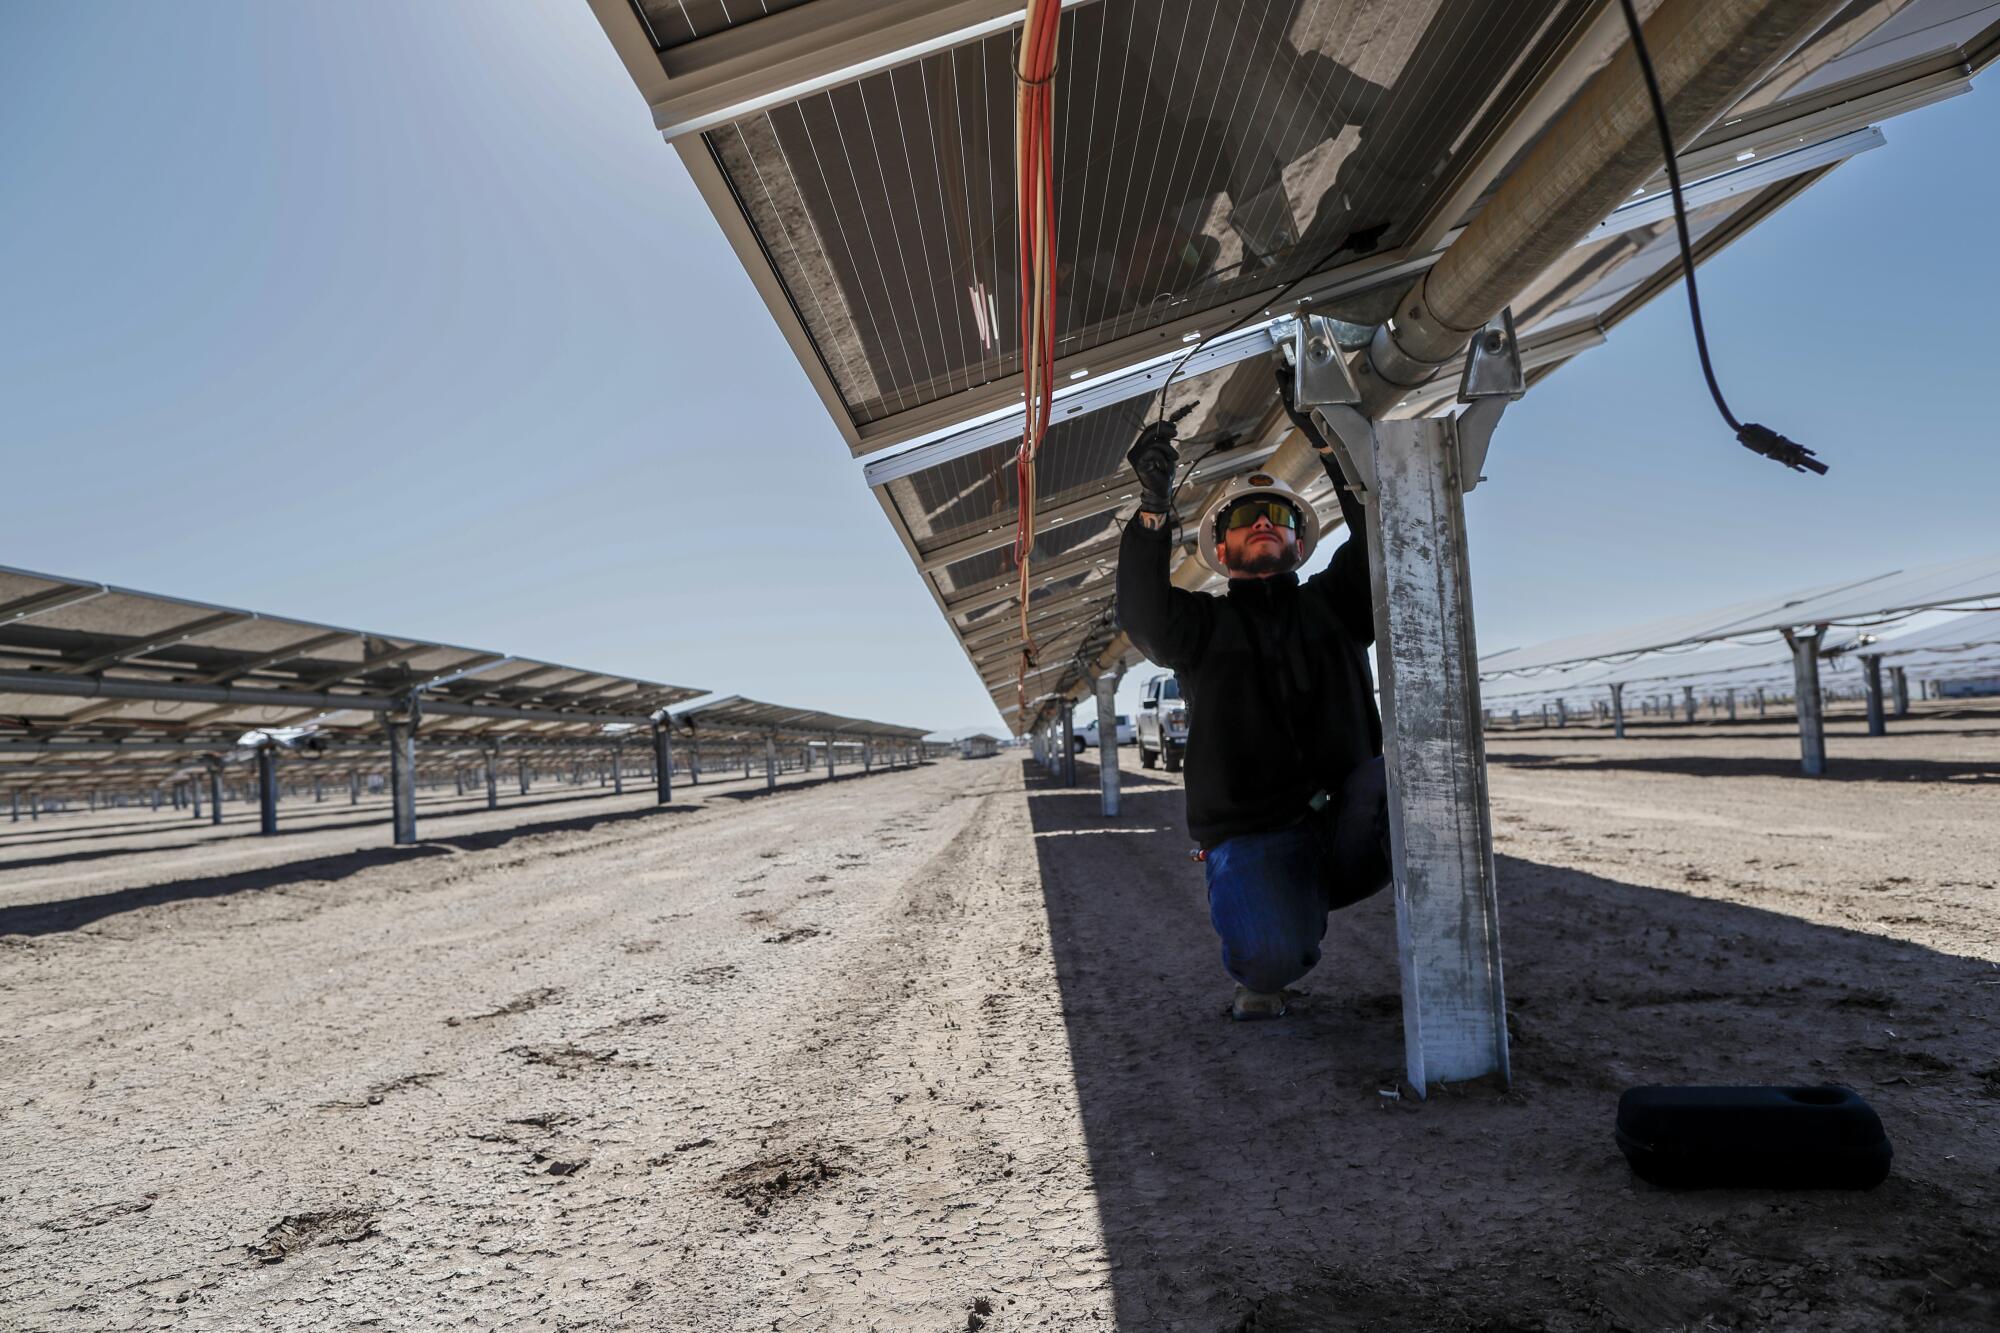 Technician Junior Lopez performs maintenance at Arevon's Mt. Signal 3 solar farm in the Imperial Valley.